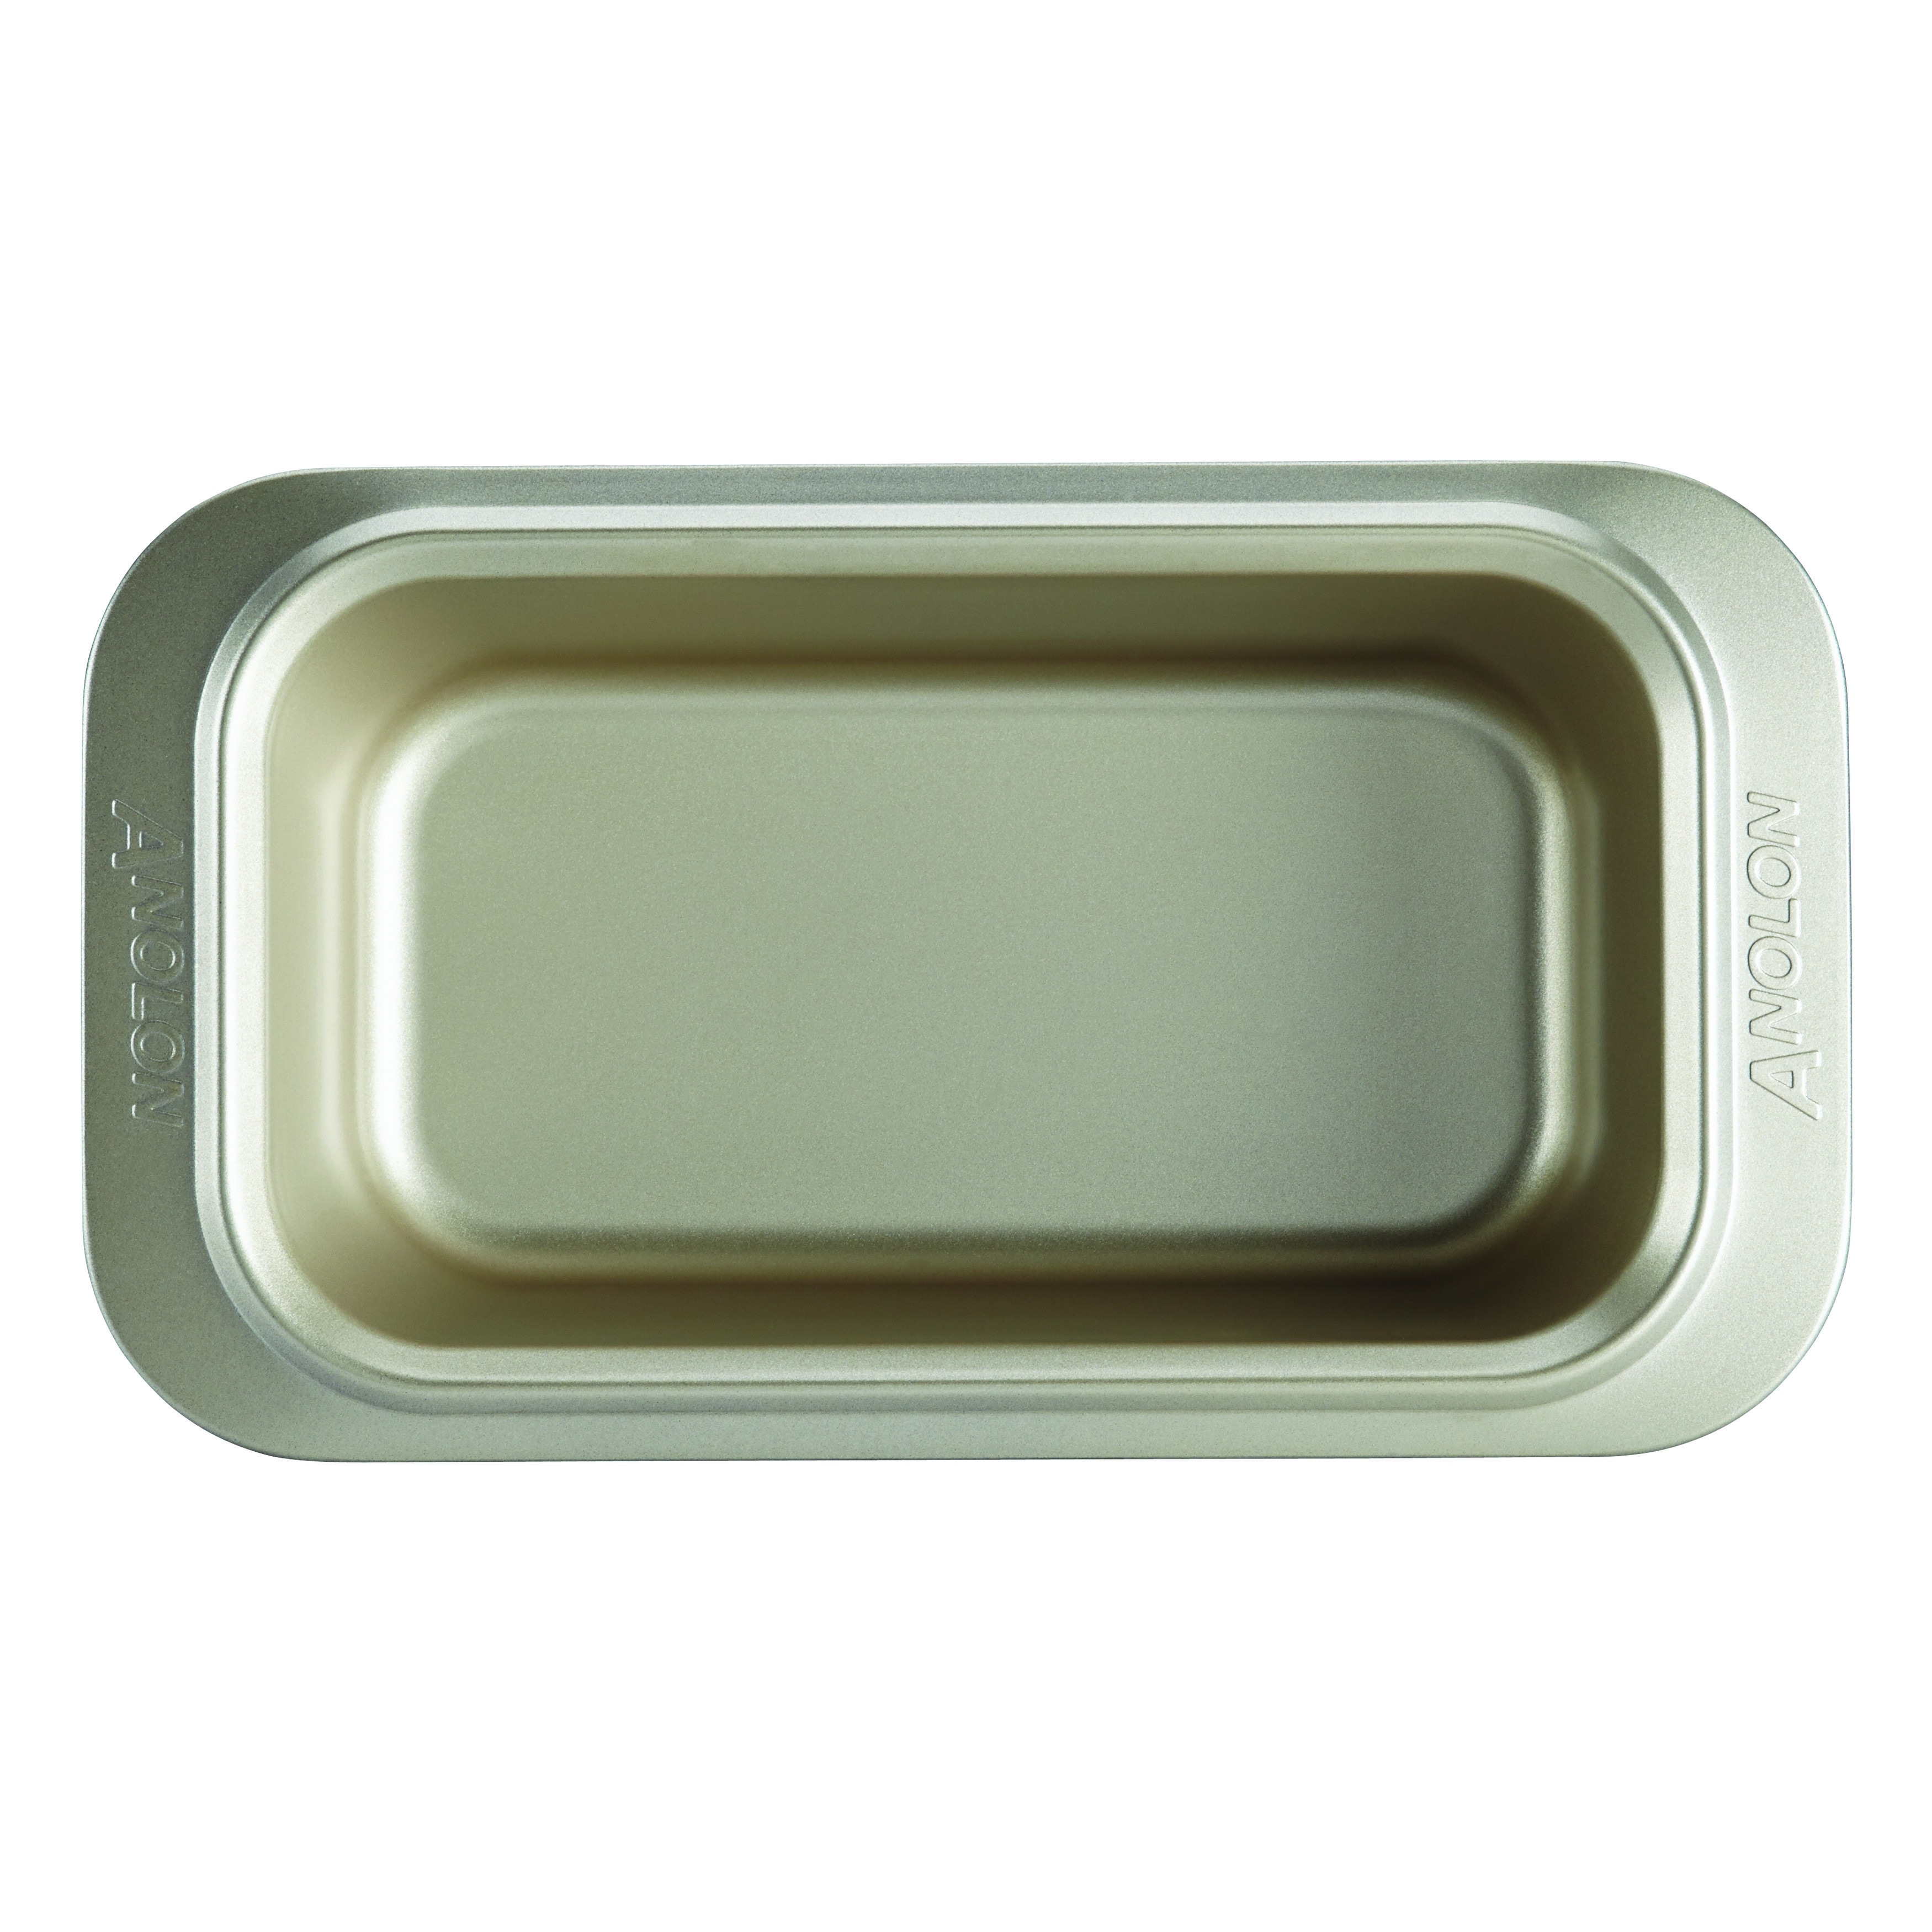 https://ak1.ostkcdn.com/images/products/10390864/Anolon-Pewter-Onyx-Nonstick-Bakeware-Loaf-Pan-f40b30cf-4741-42b0-8867-8098a19a3491.jpg